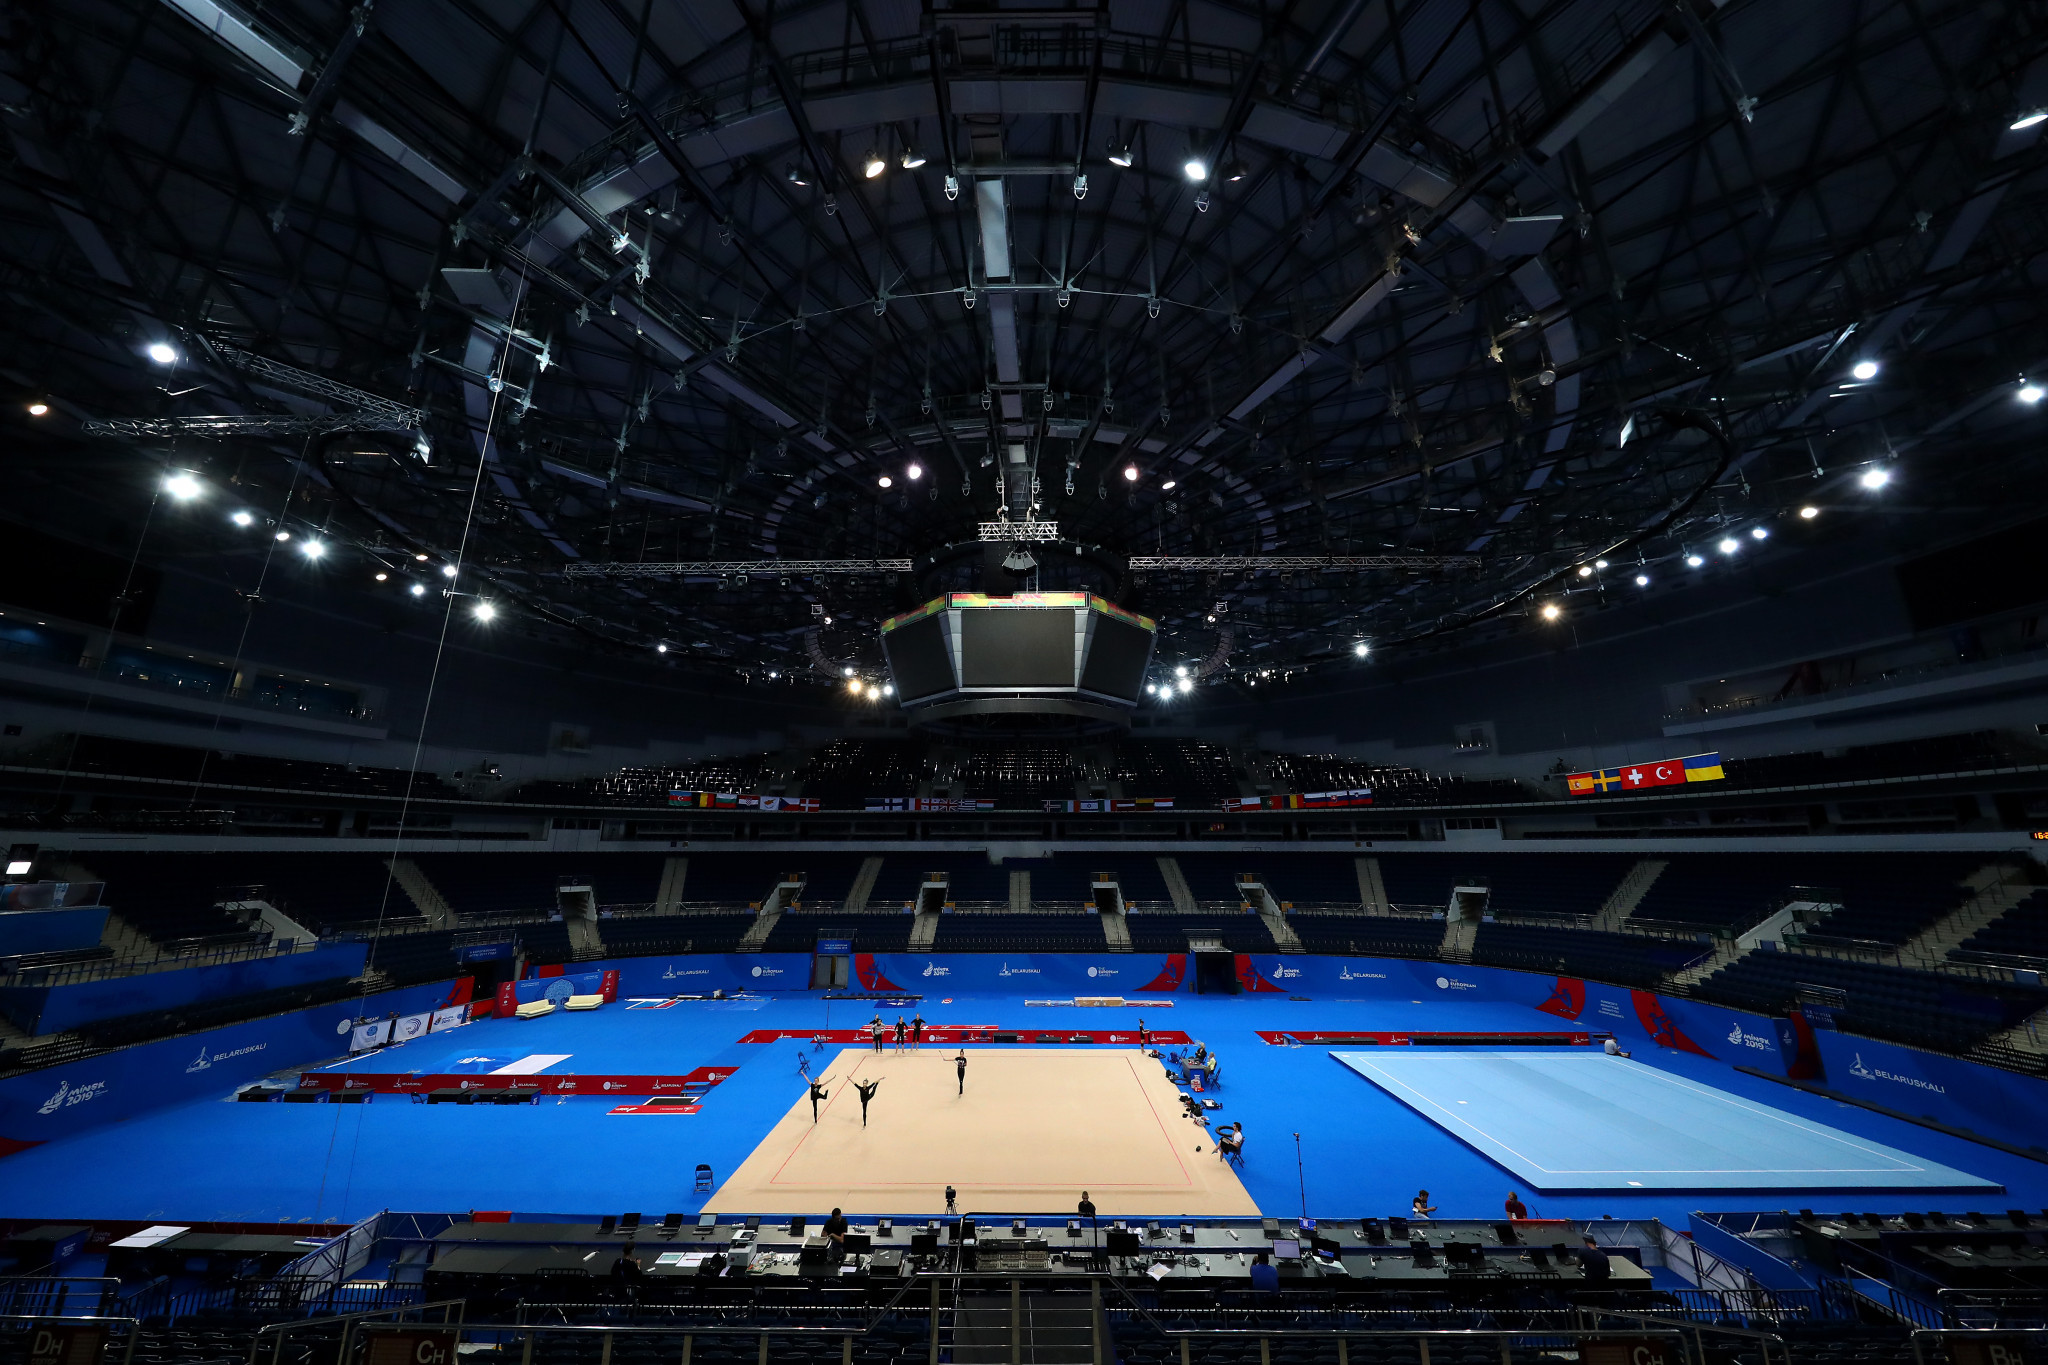 European Gymnastics and EOC "working" for return of sport at 2027 European Games